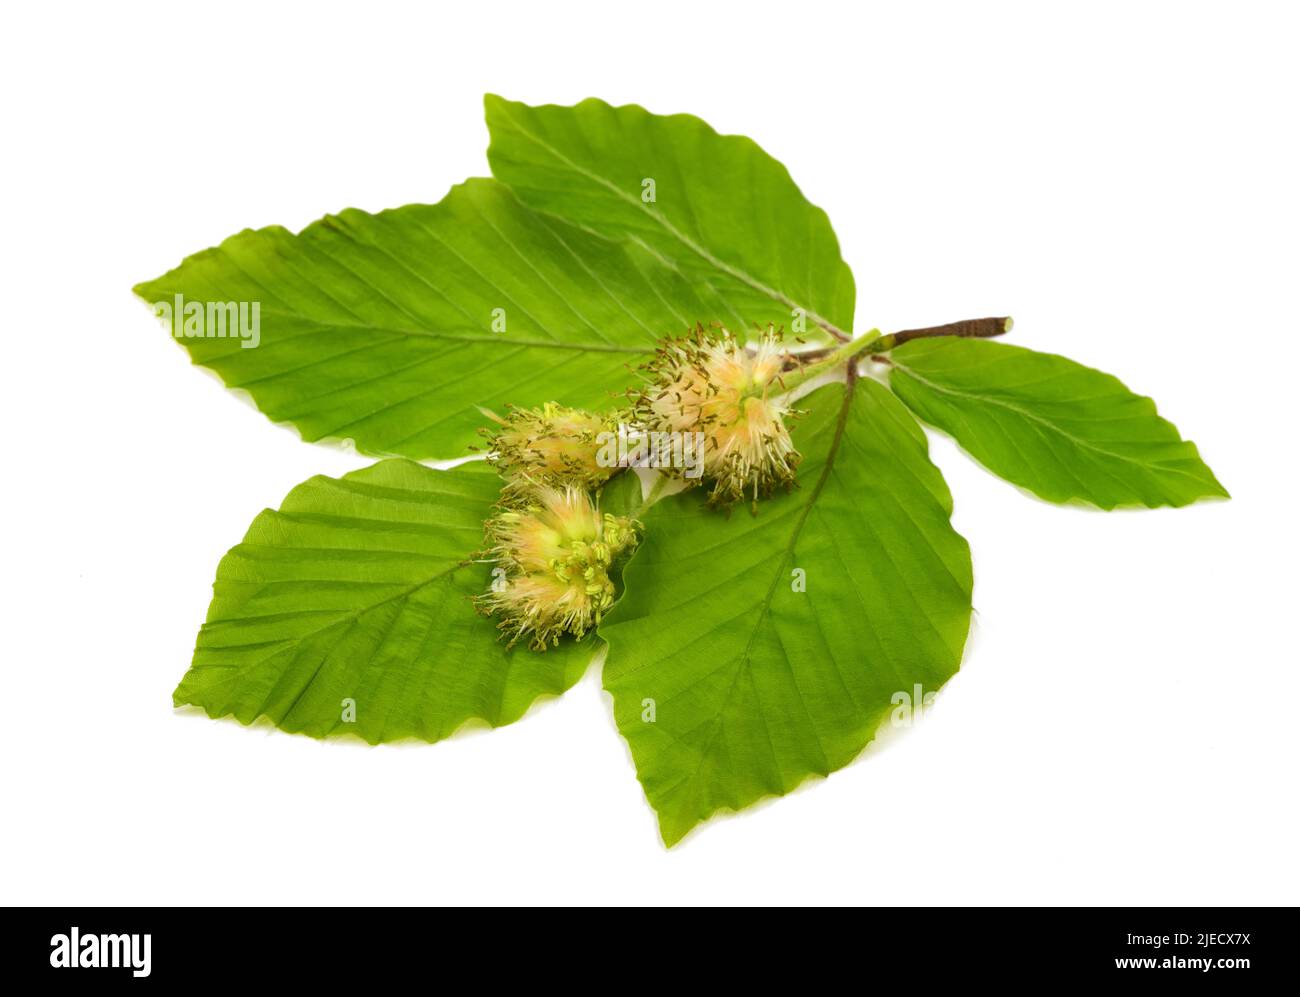 Beech branch with flowers isolated on white background Stock Photo